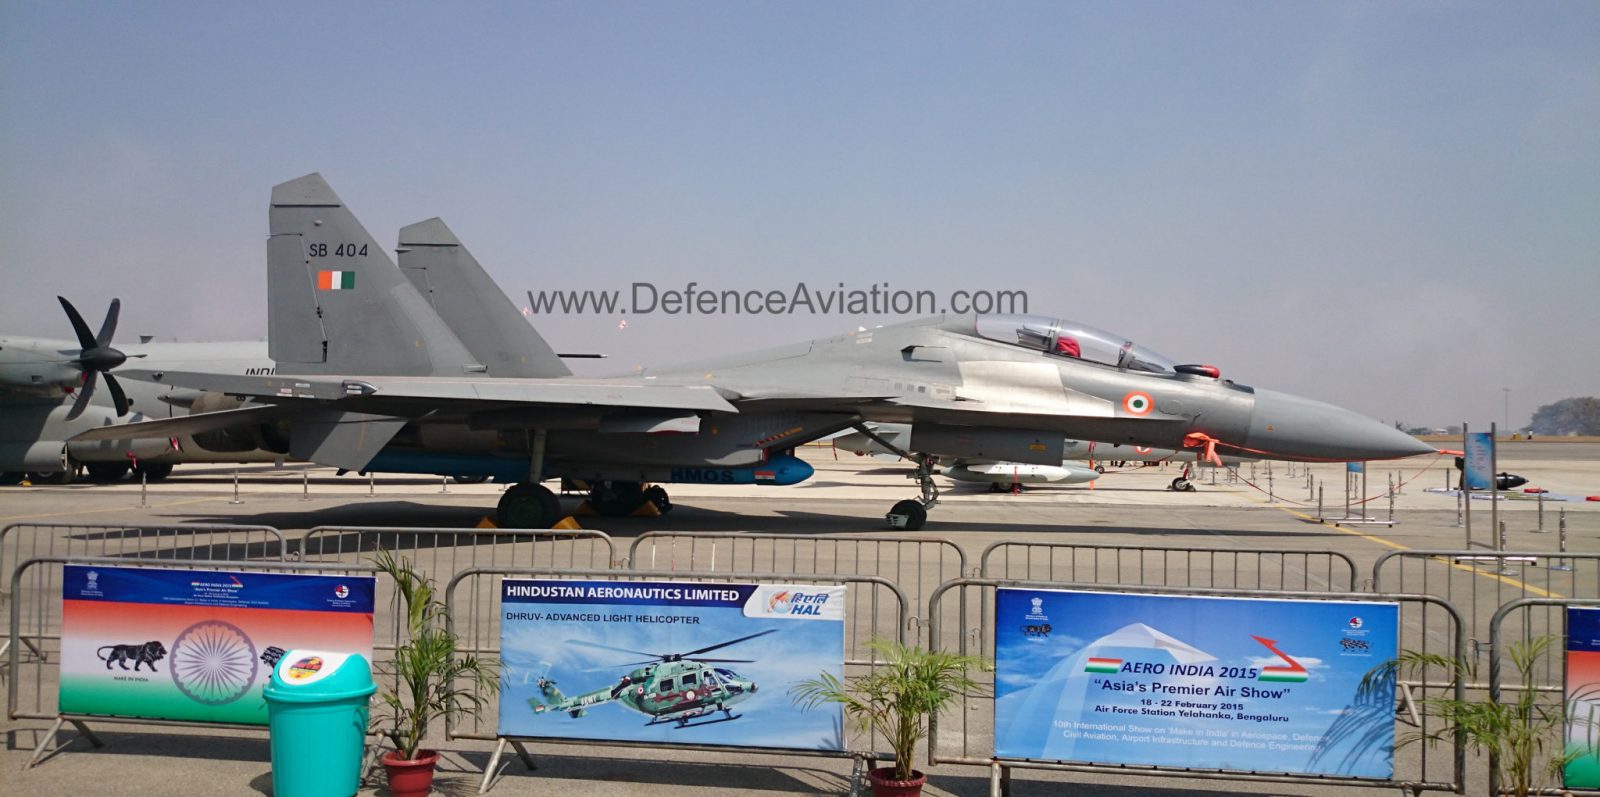 SU-30MKI with BrahMos handed over to Indian Air Force at Aero India 2015